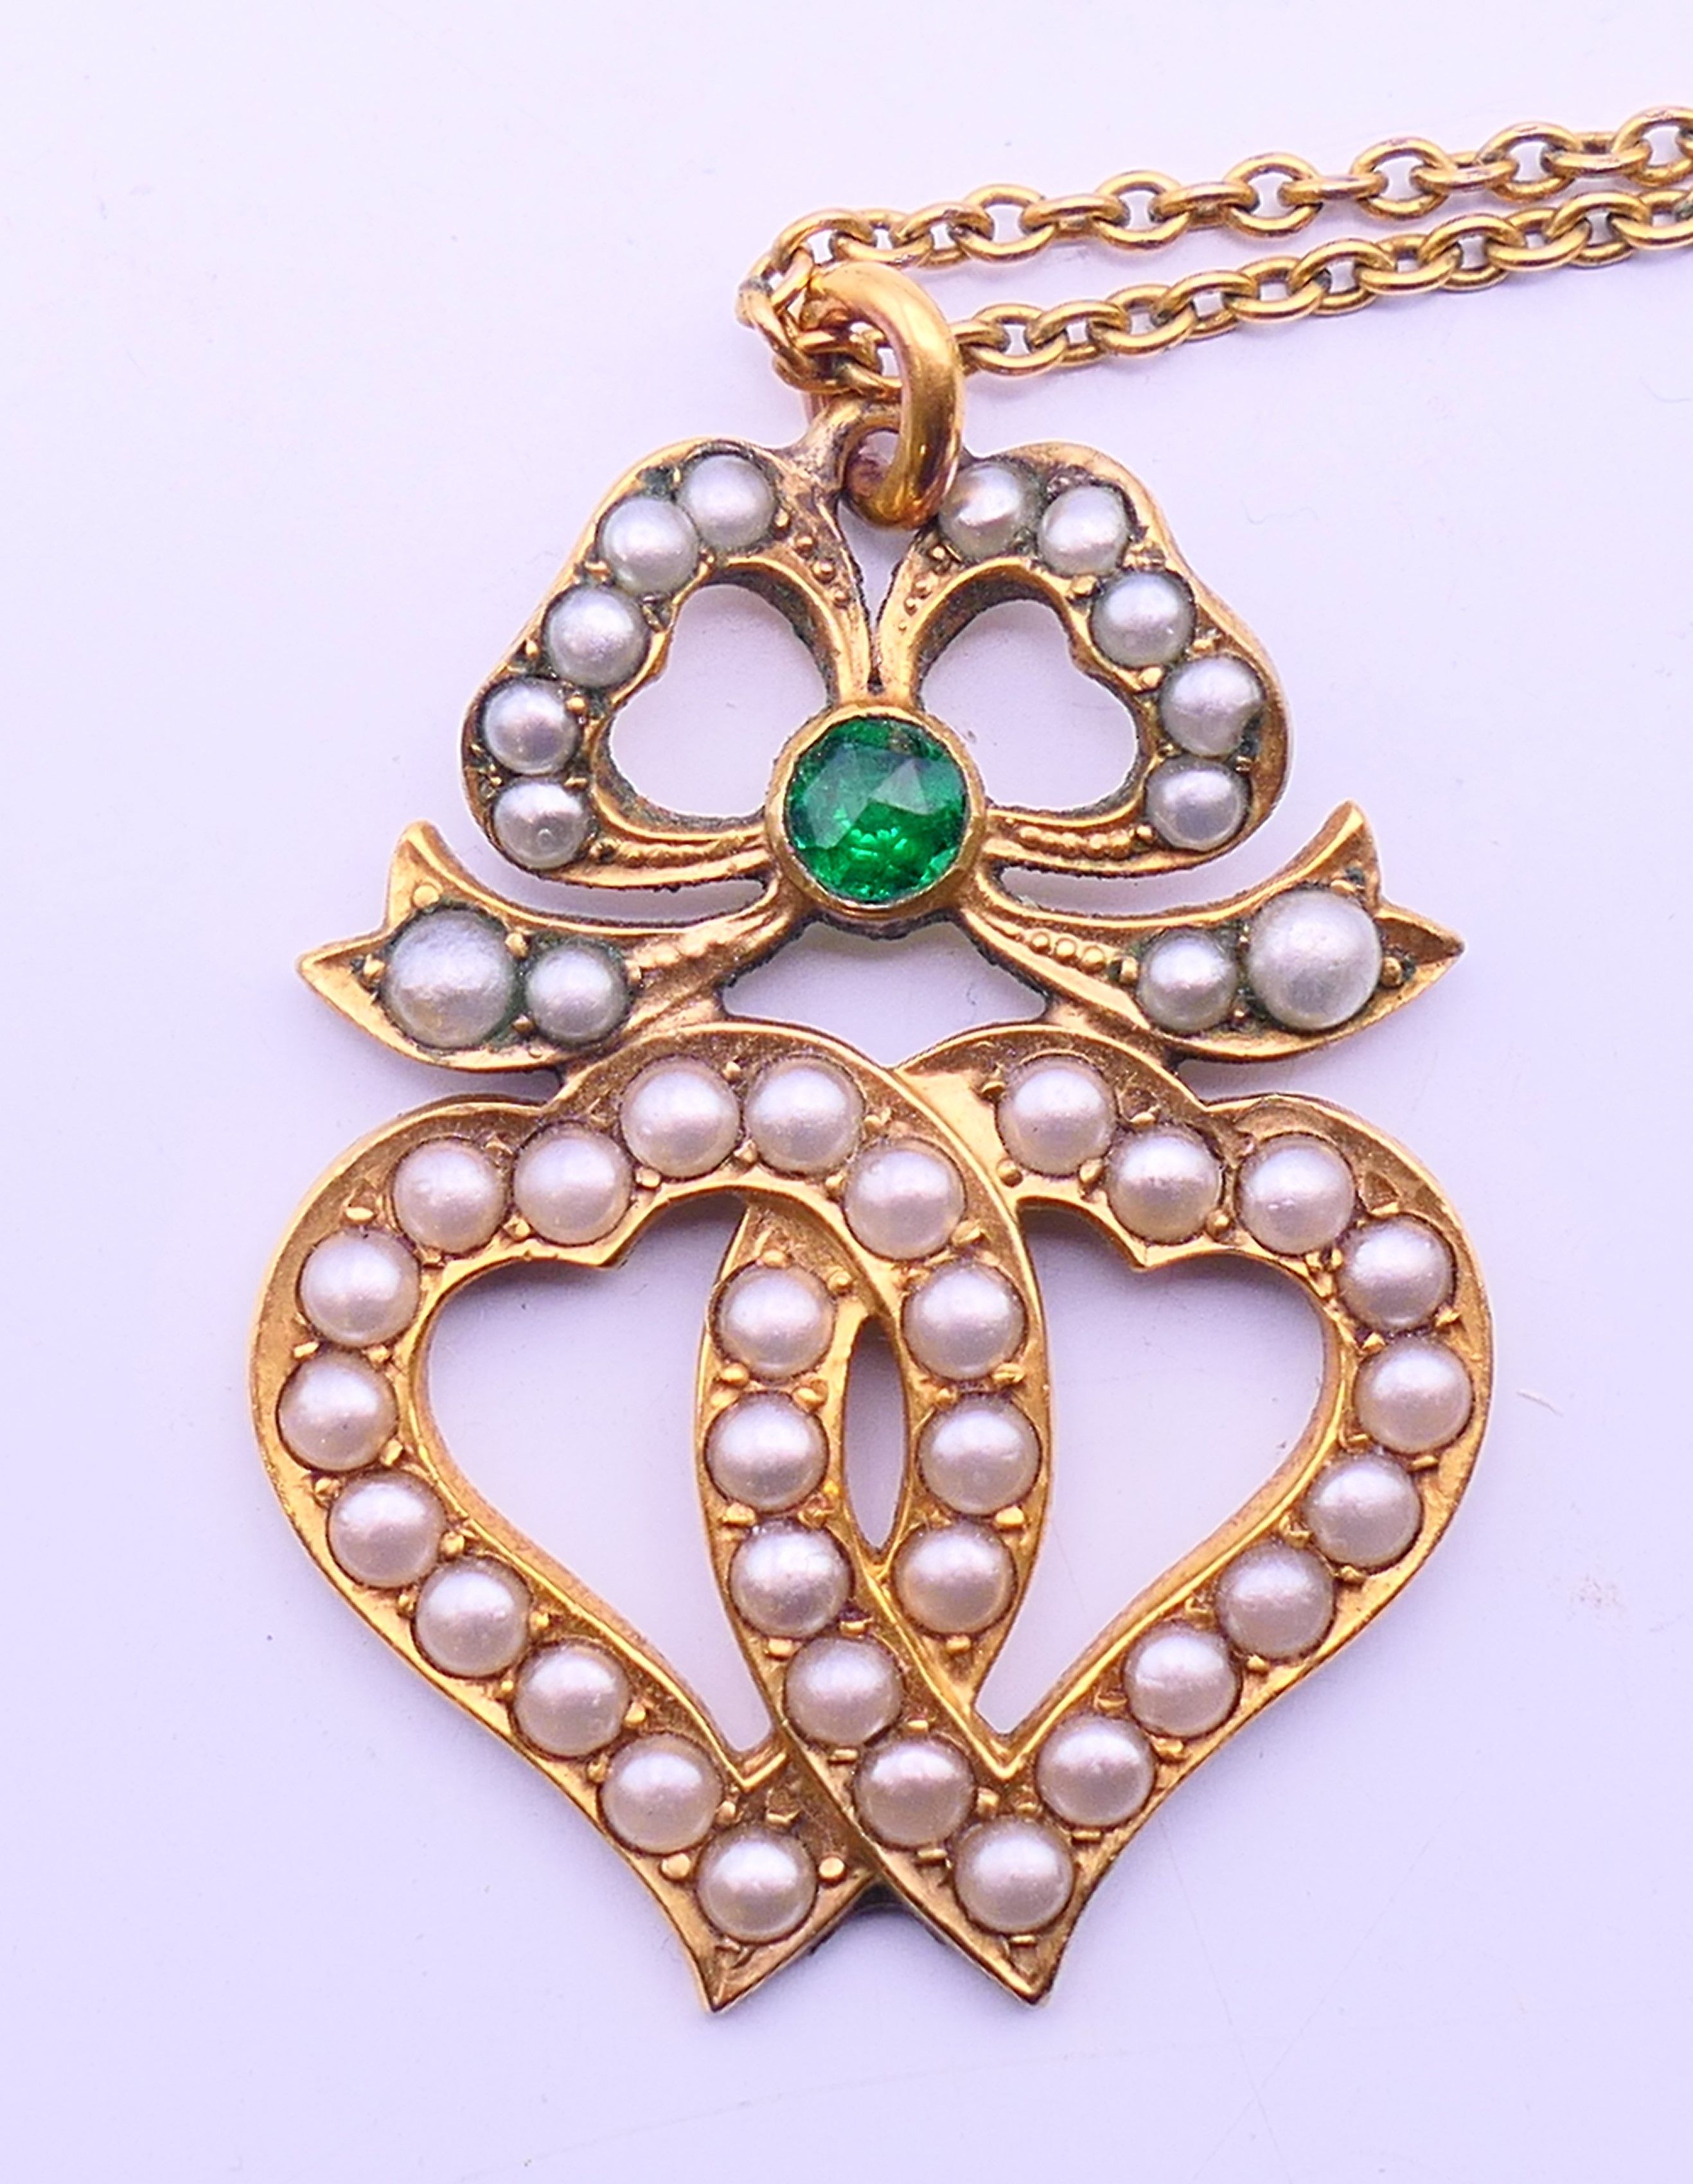 Two Edwardian pendant necklaces, one on a 9 ct gold chain, and a gilt metal and amethyst bracelet. - Image 6 of 14